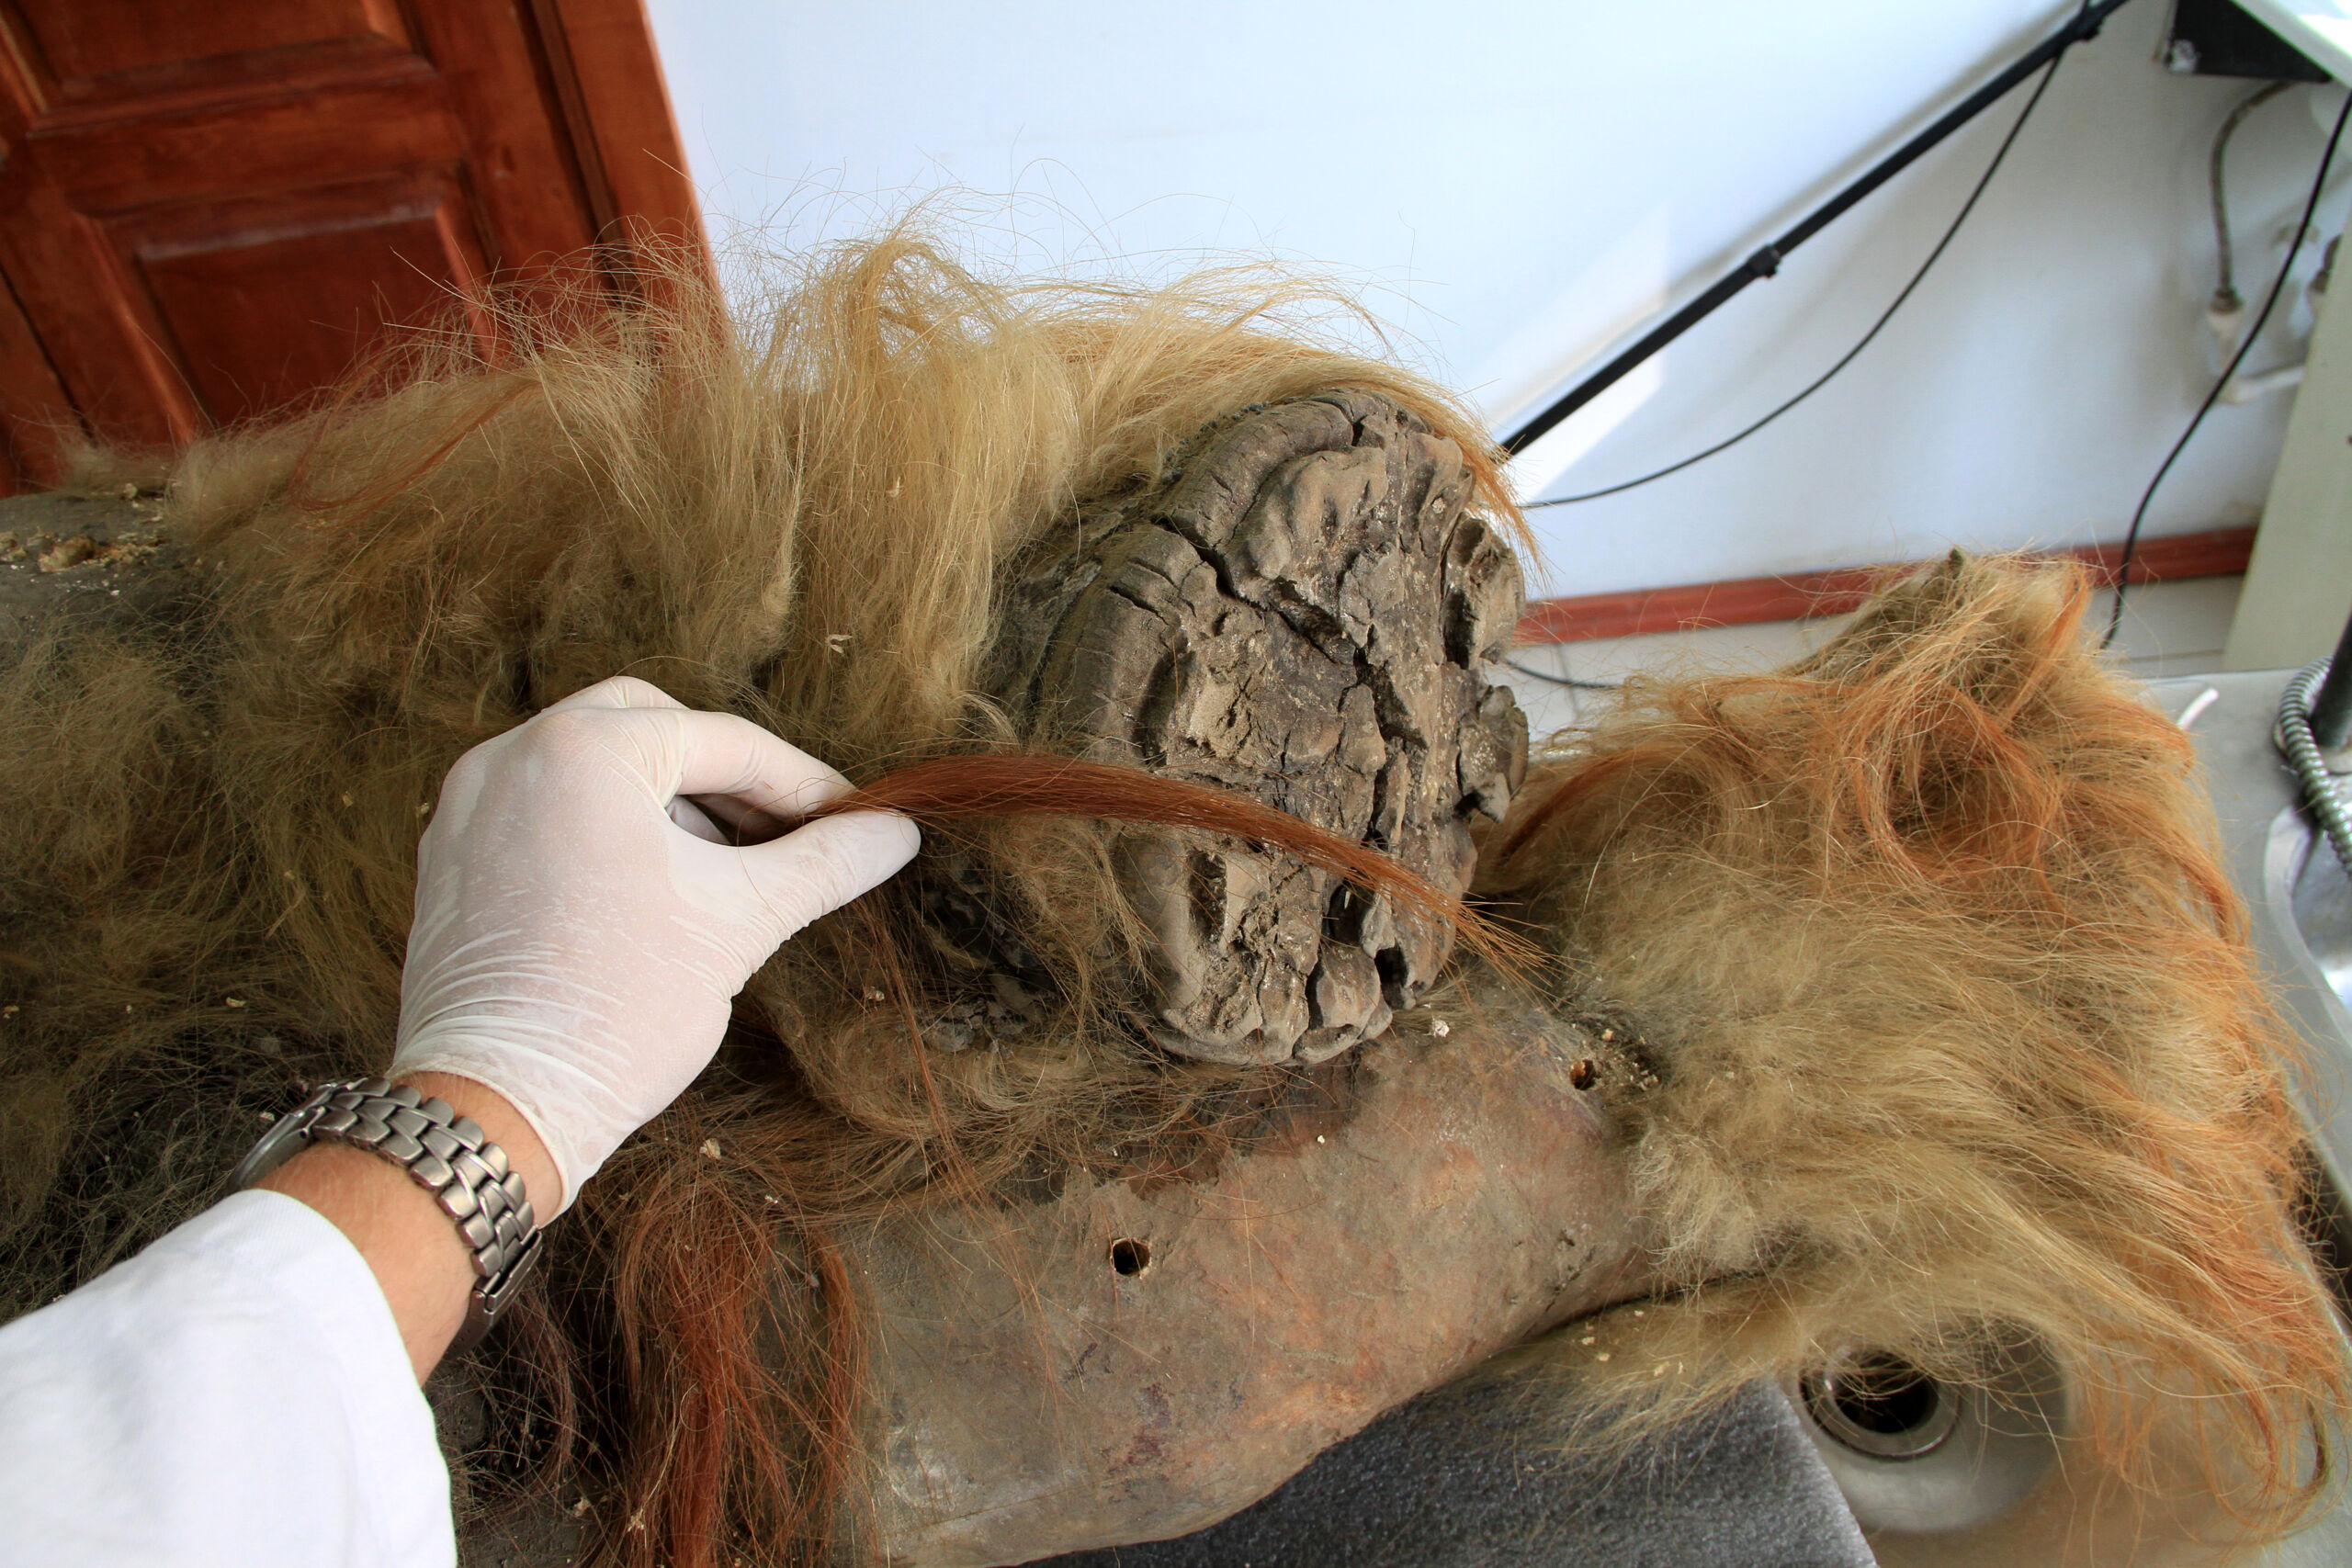 The distinctive fur of the mammoth may be the result of several genetic changes.